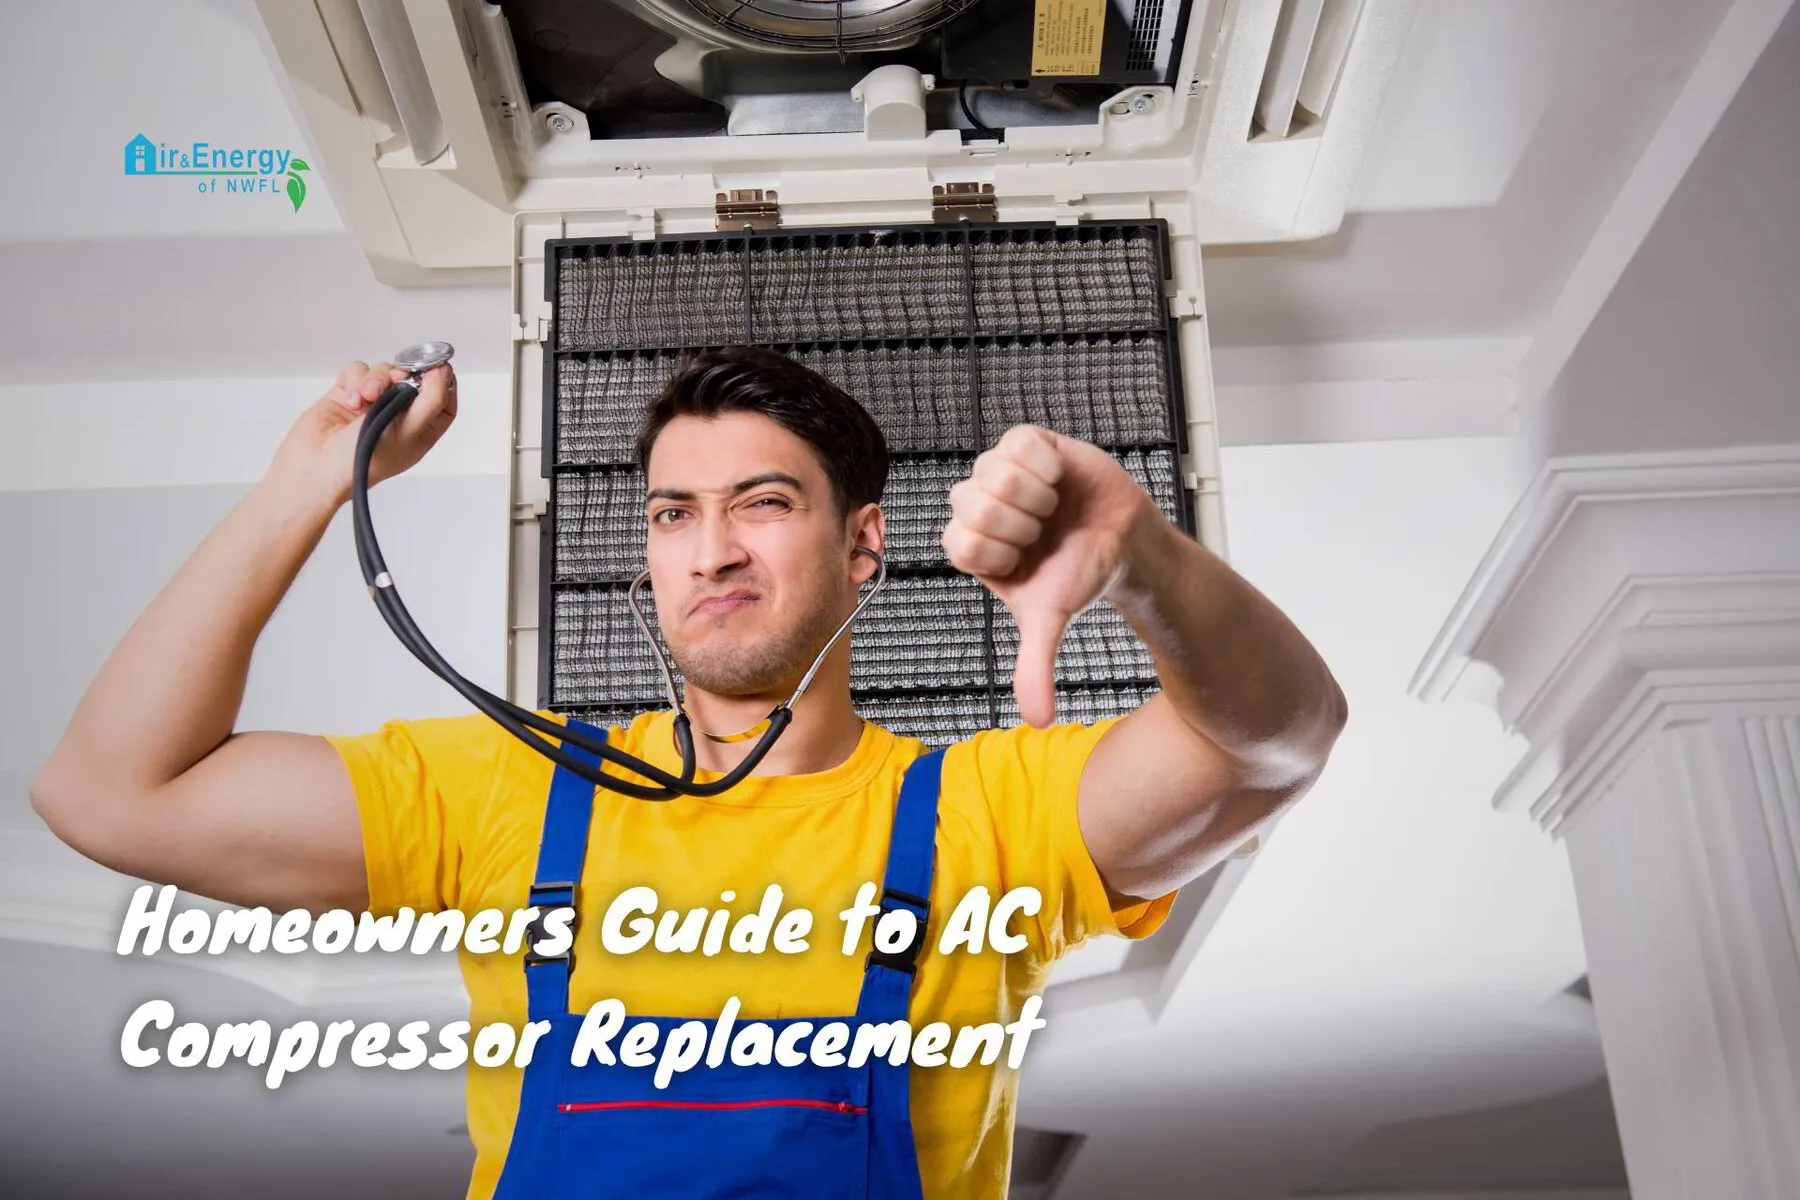 Homeowners Guide to AC Compressor Replacement | Air &amp; Energy of NWFL